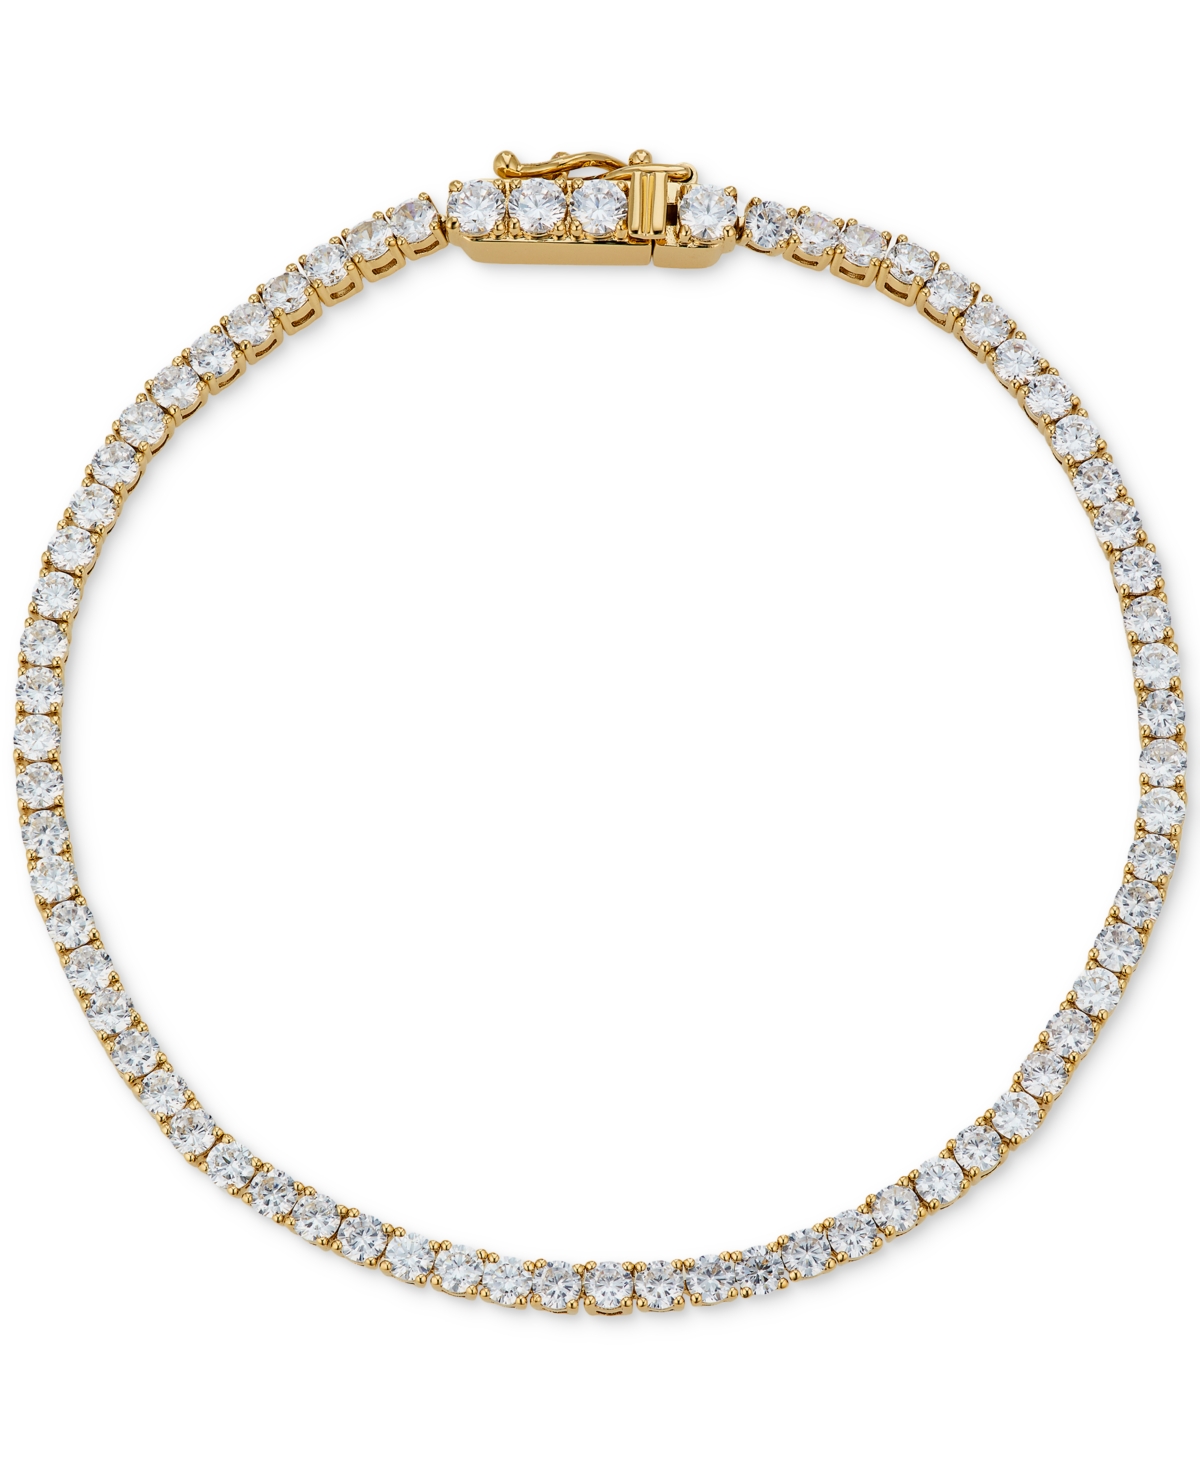 18k Gold-Plated Cubic Zirconia Tennis Bracelet, Created for Macy's - Gold